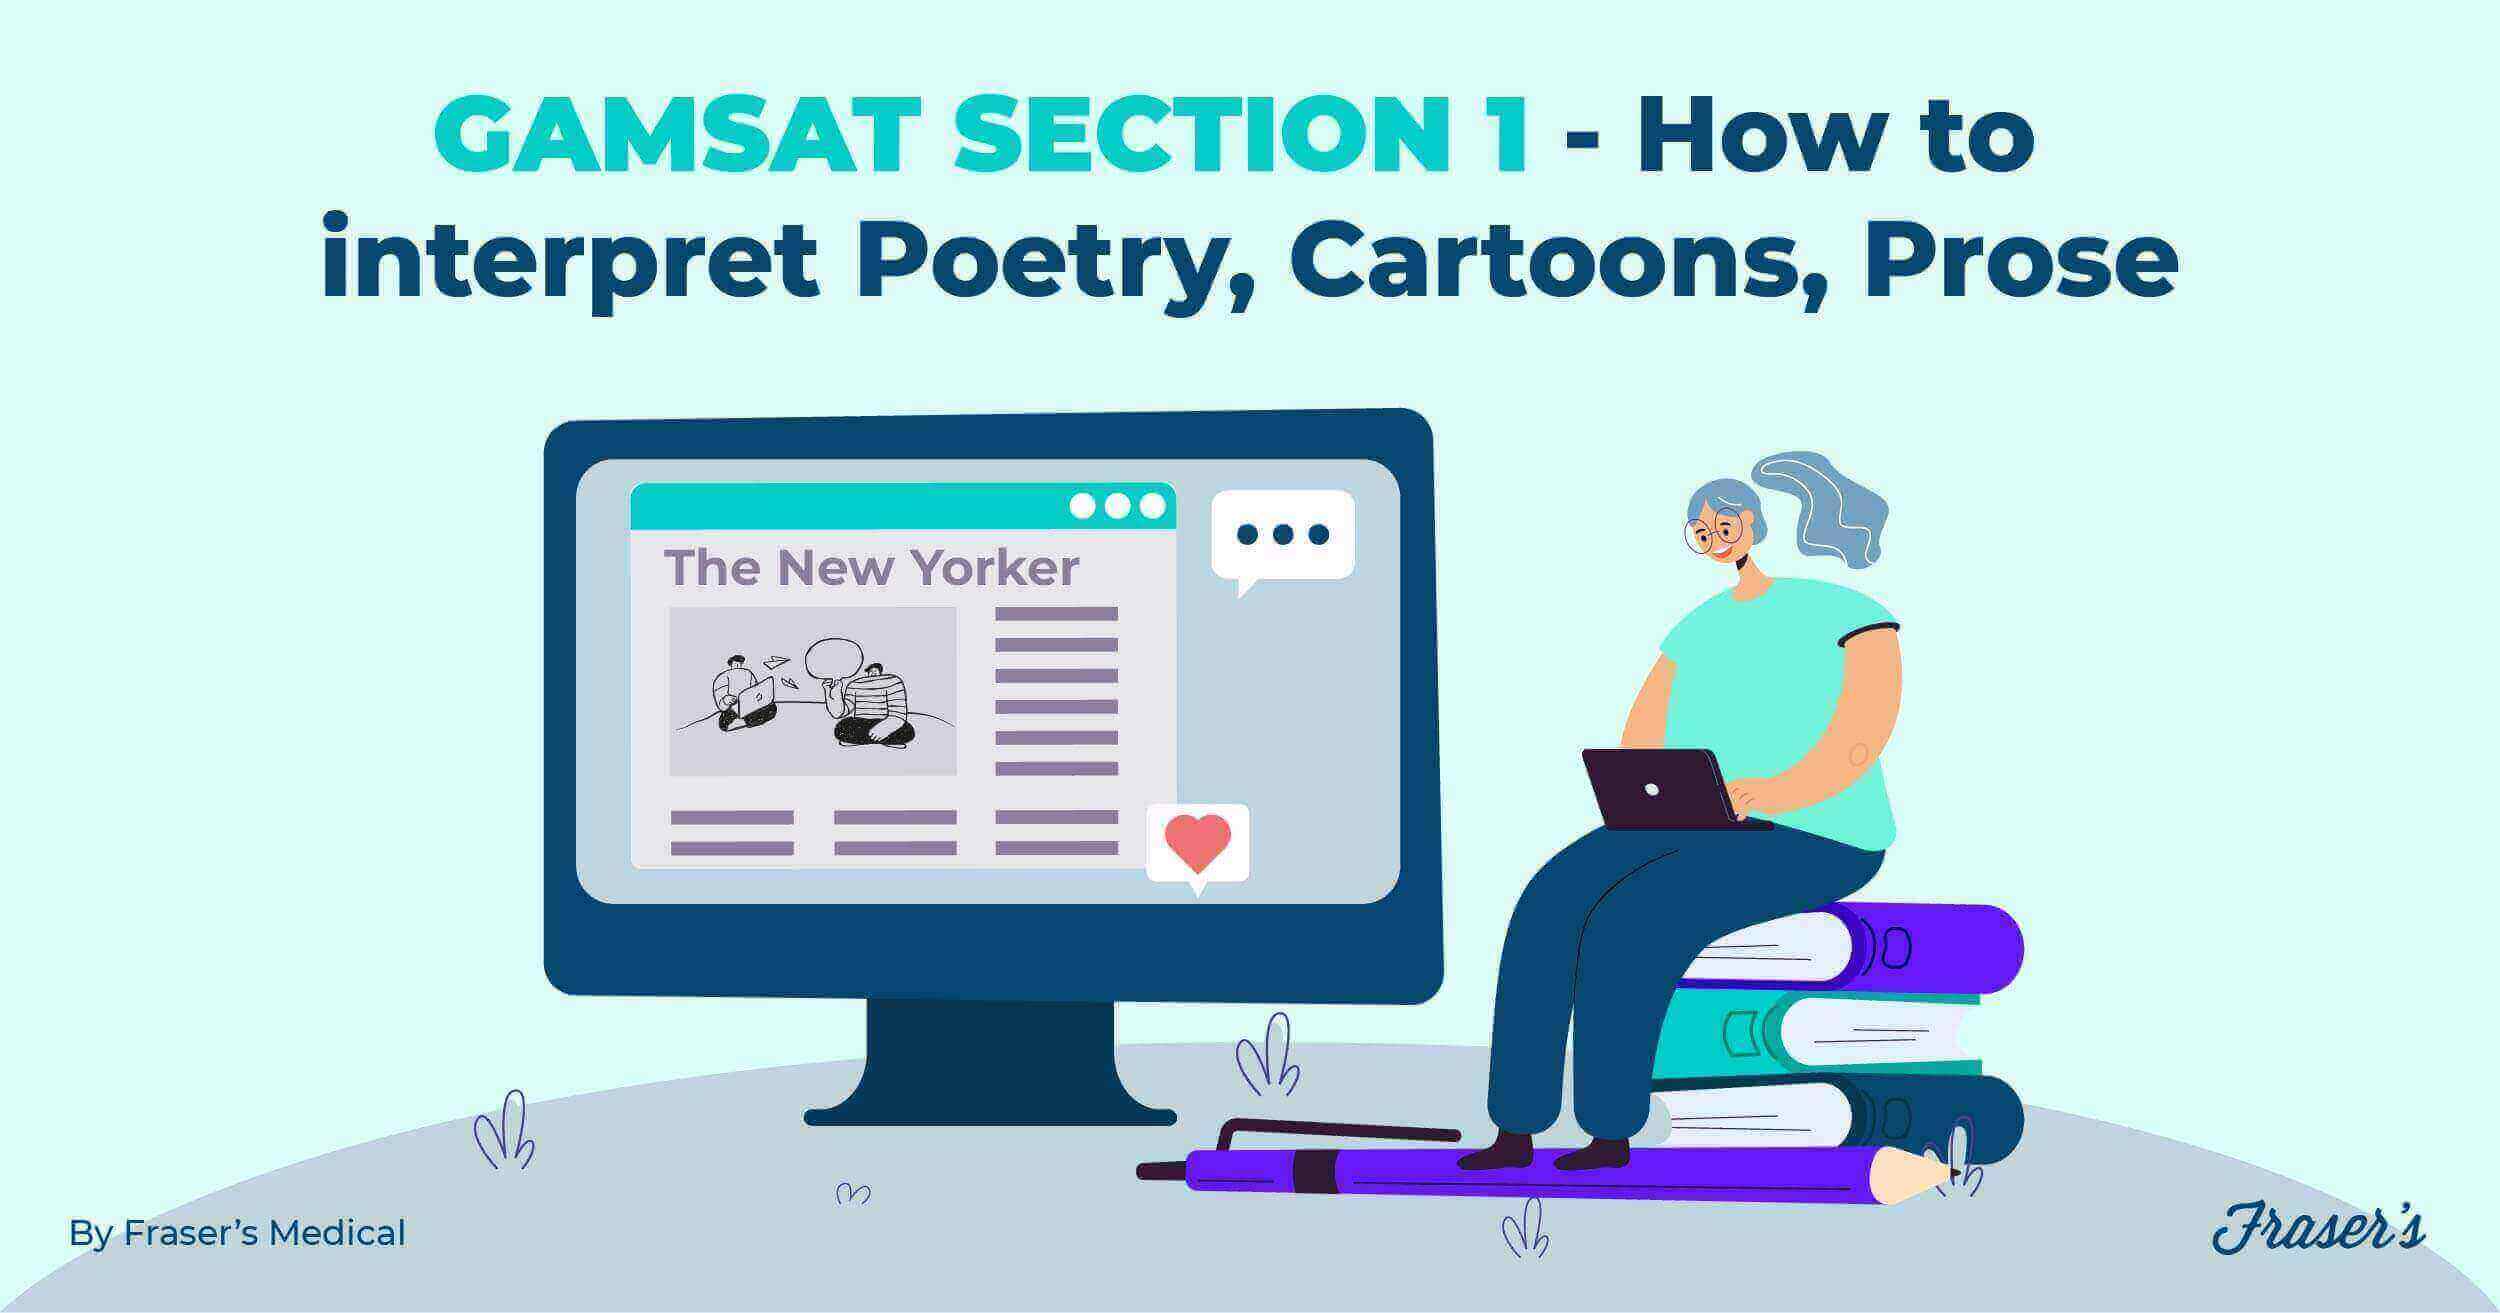 GAMSAT Section 1 - How to interpret Poetry, Cartoons, Prose